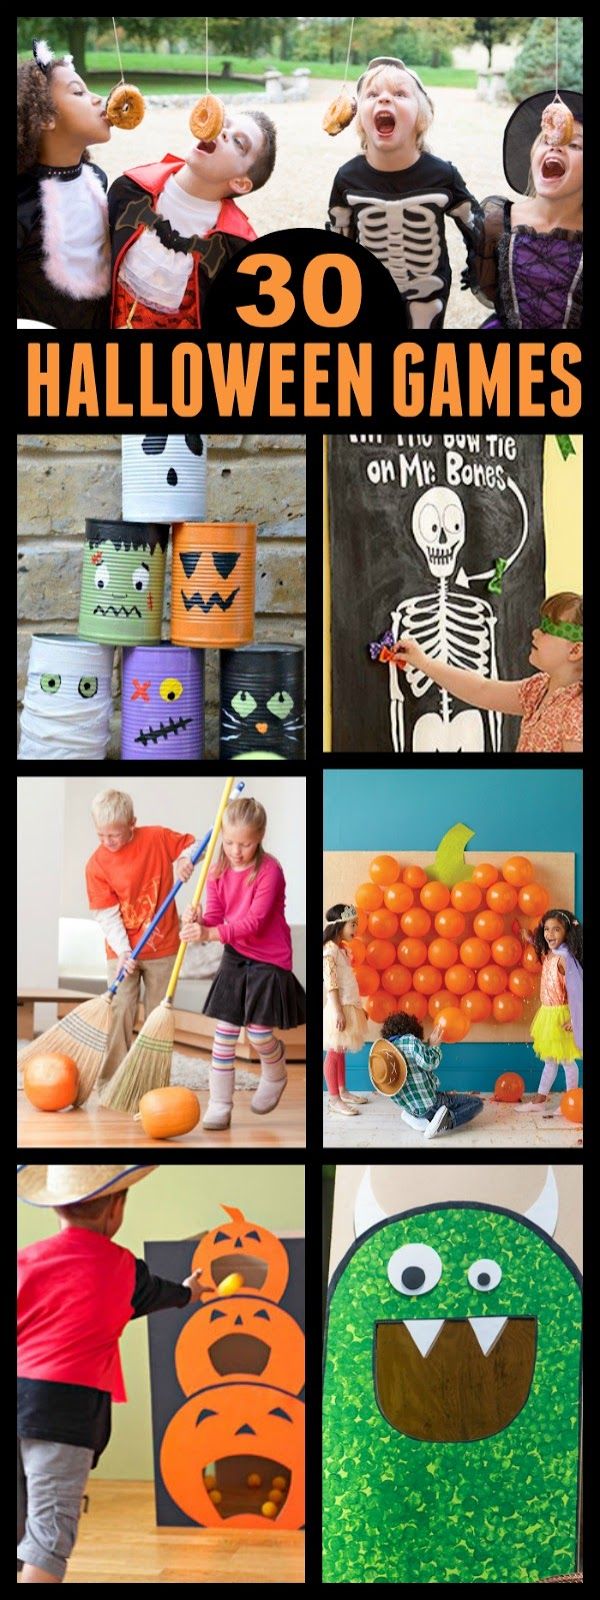 Halloween Game Ideas For Parties